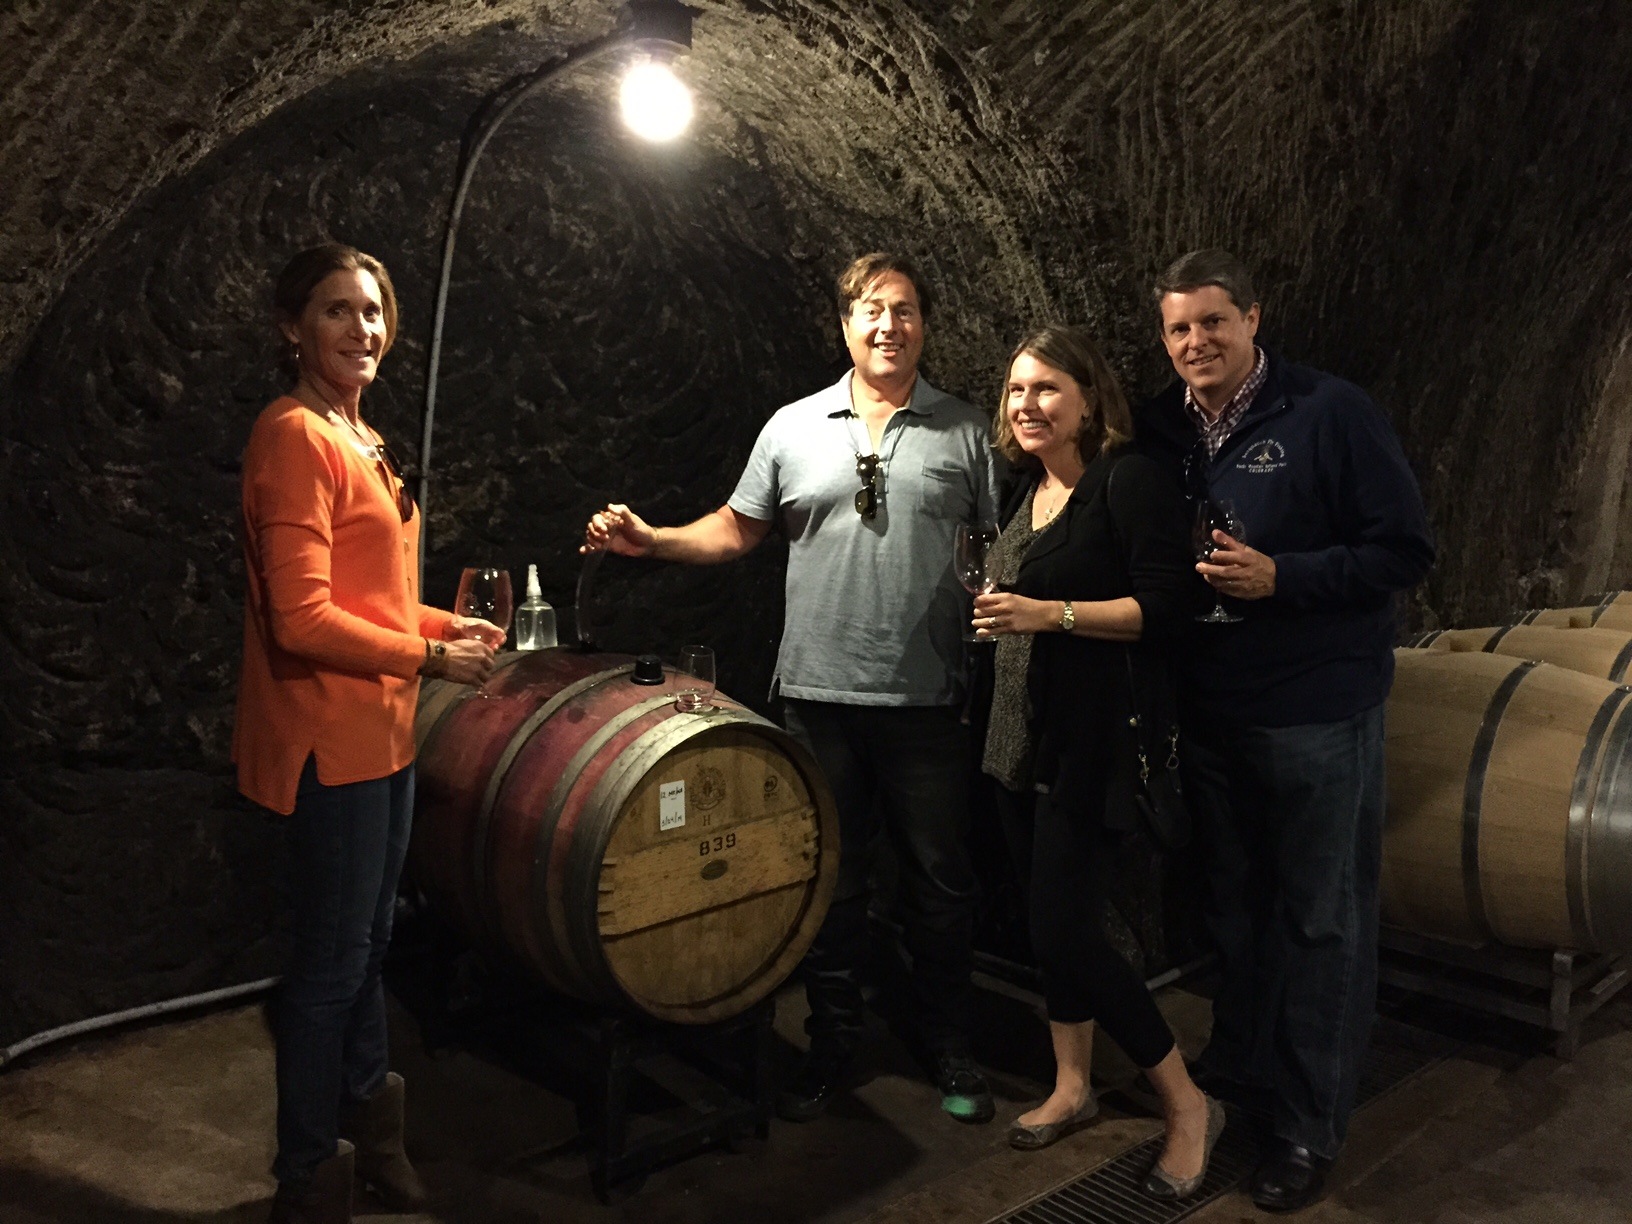 Repris Winery Caves - Booker and Butler Concierges